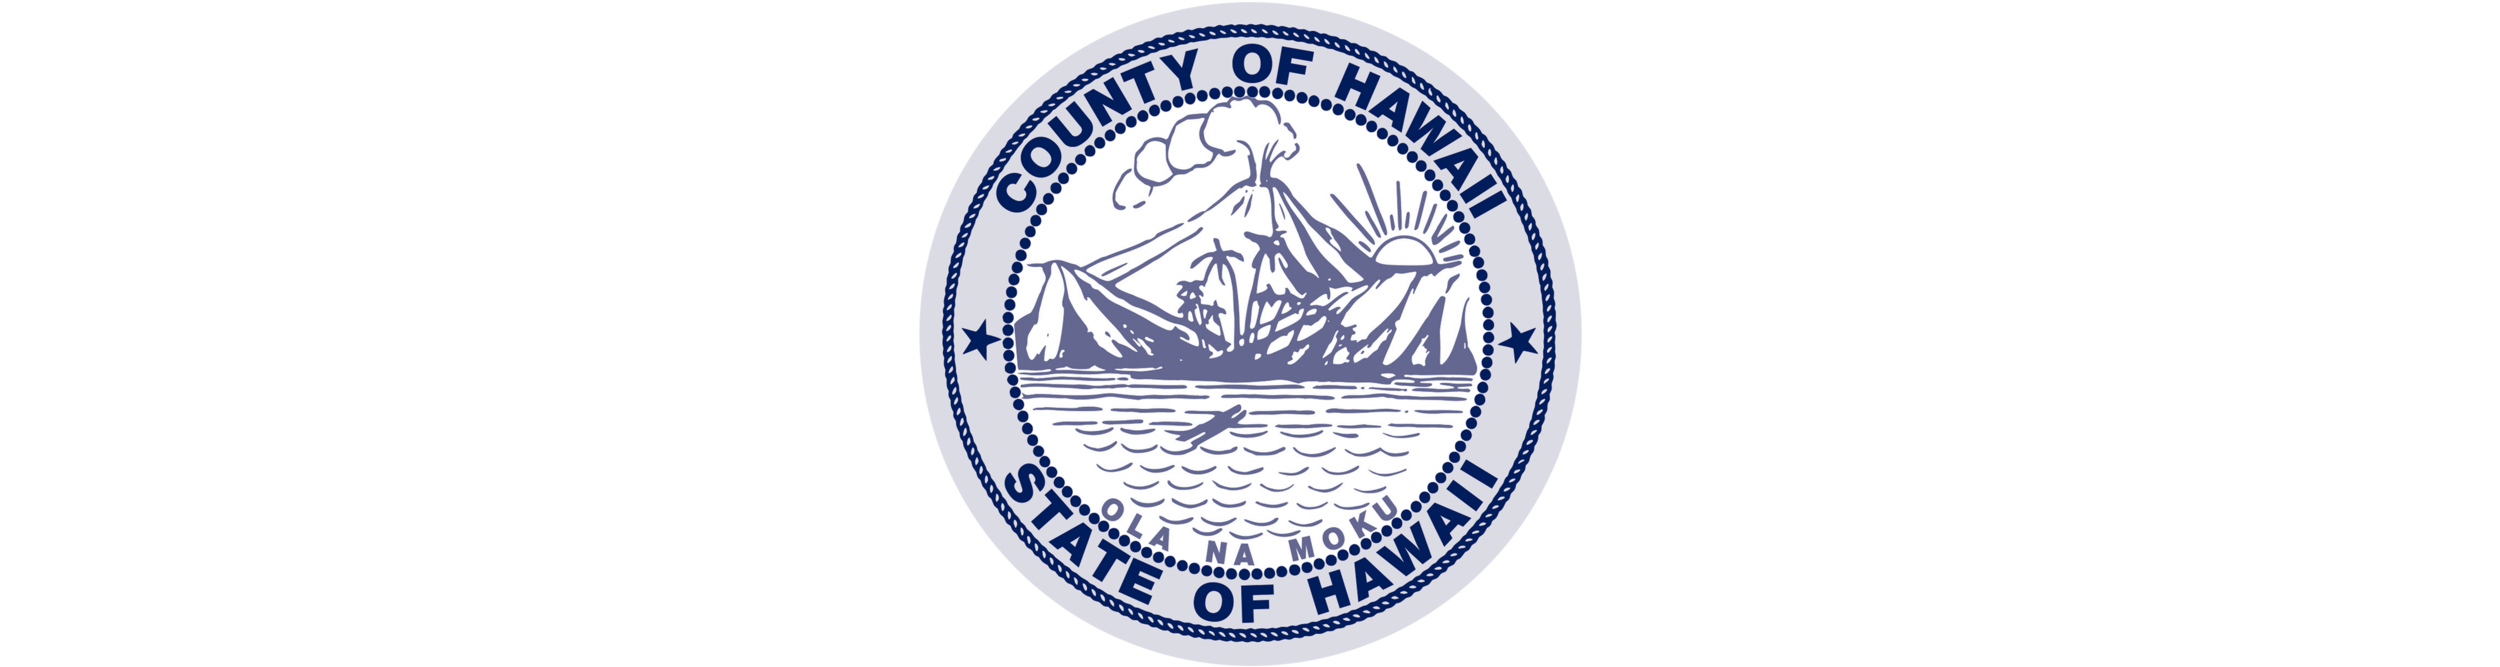 HPHA-resources-logo-Hawaii-County.png